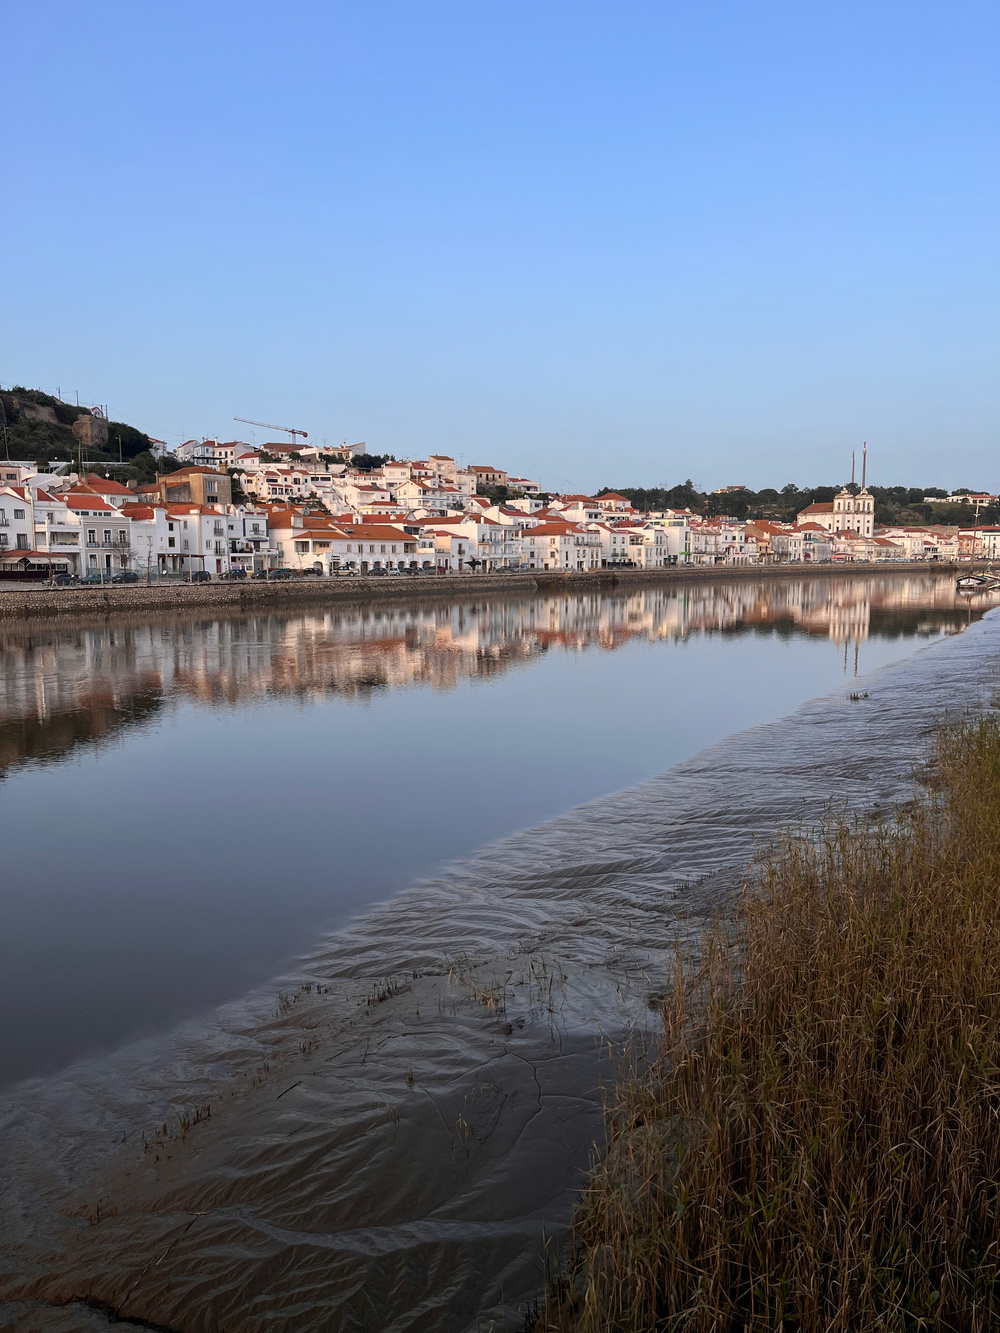 Alcácer do Sal, Portugal, from over the River Sado. The river is so still that the town is reflected in the river.